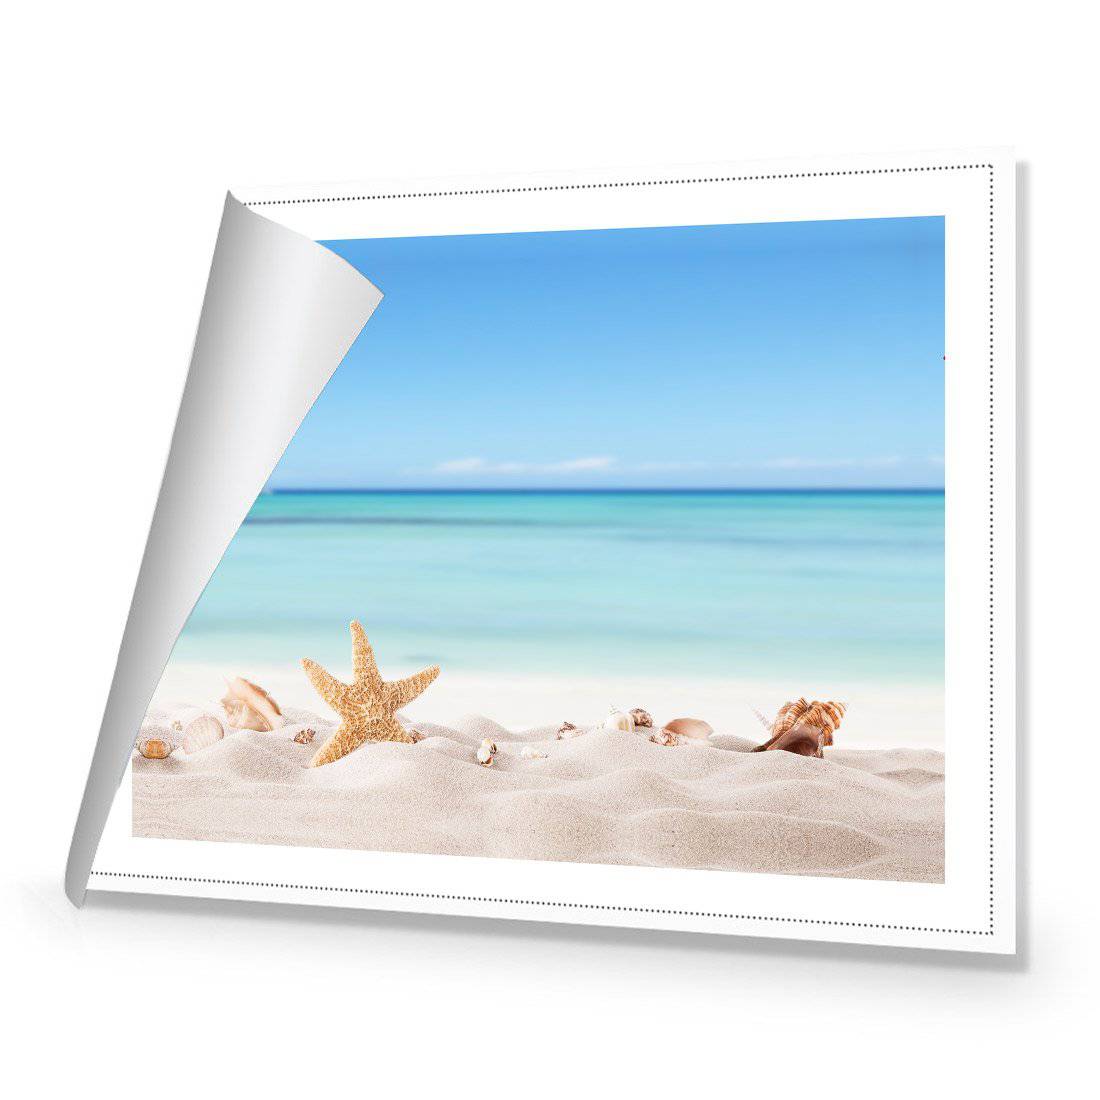 Starfish and Friends Canvas Art-Canvas-Wall Art Designs-45x30cm-Rolled Canvas-Wall Art Designs